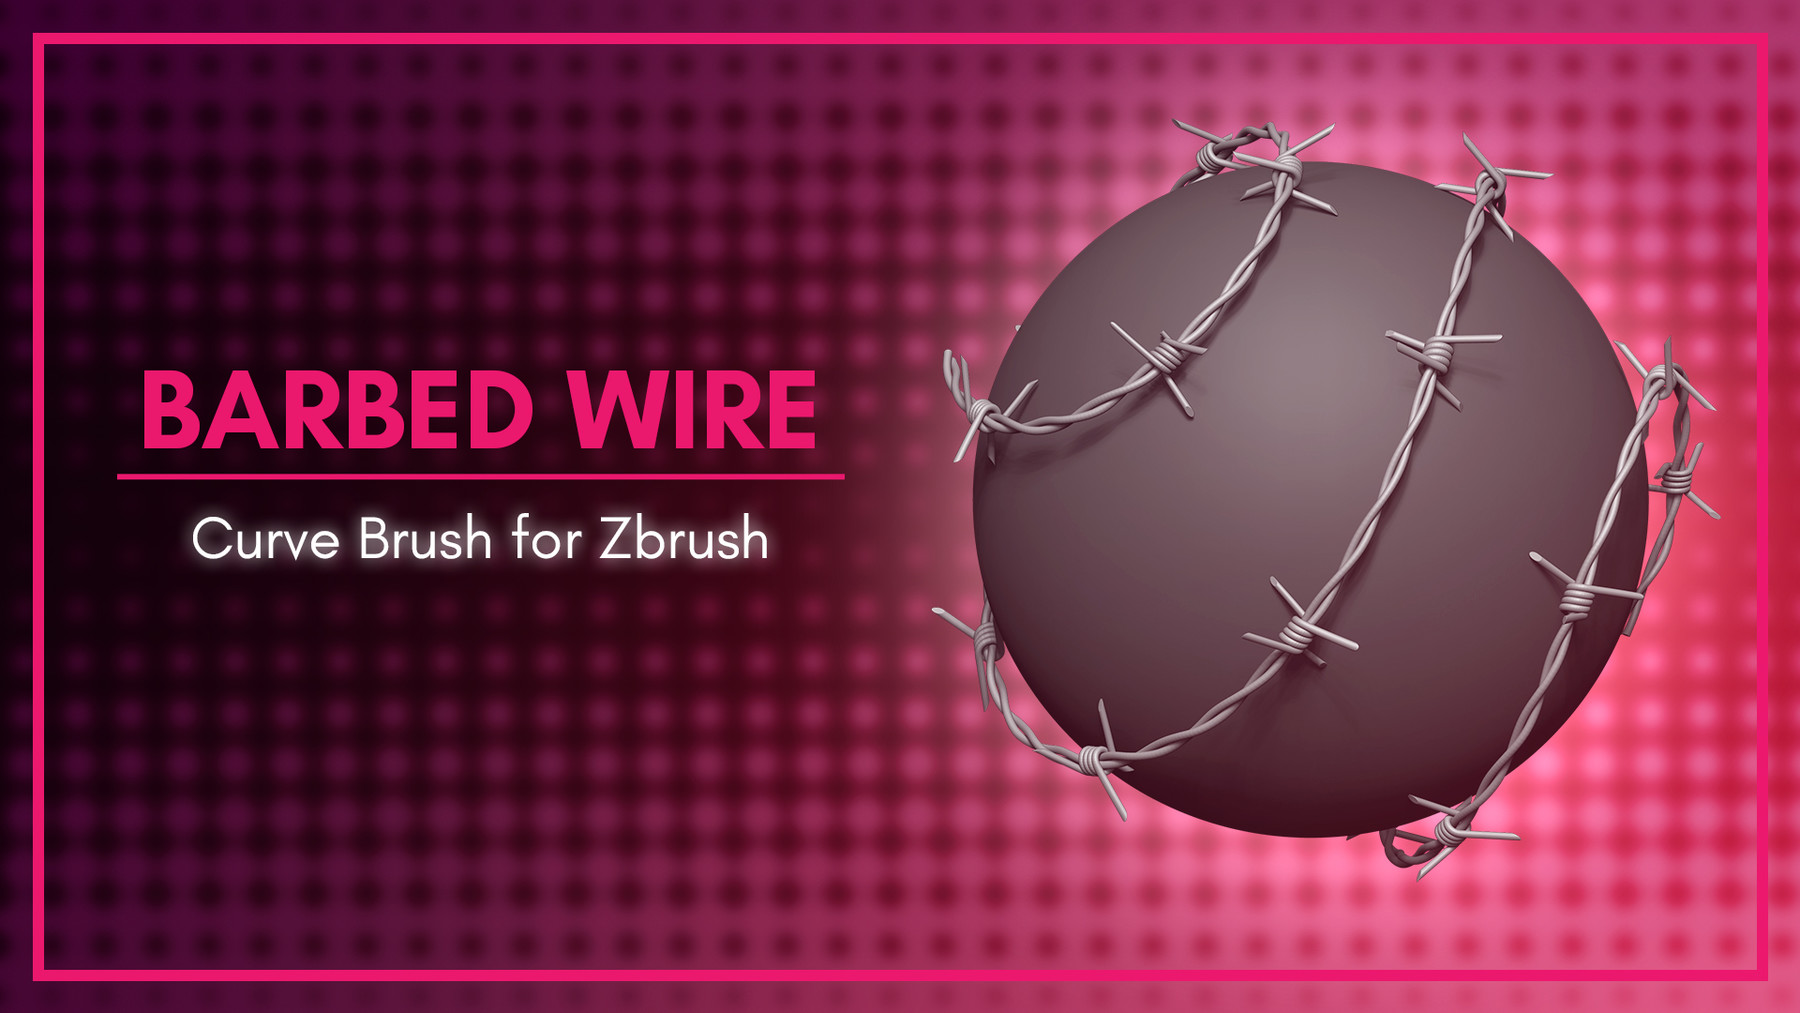 brush barbed wie zbrush